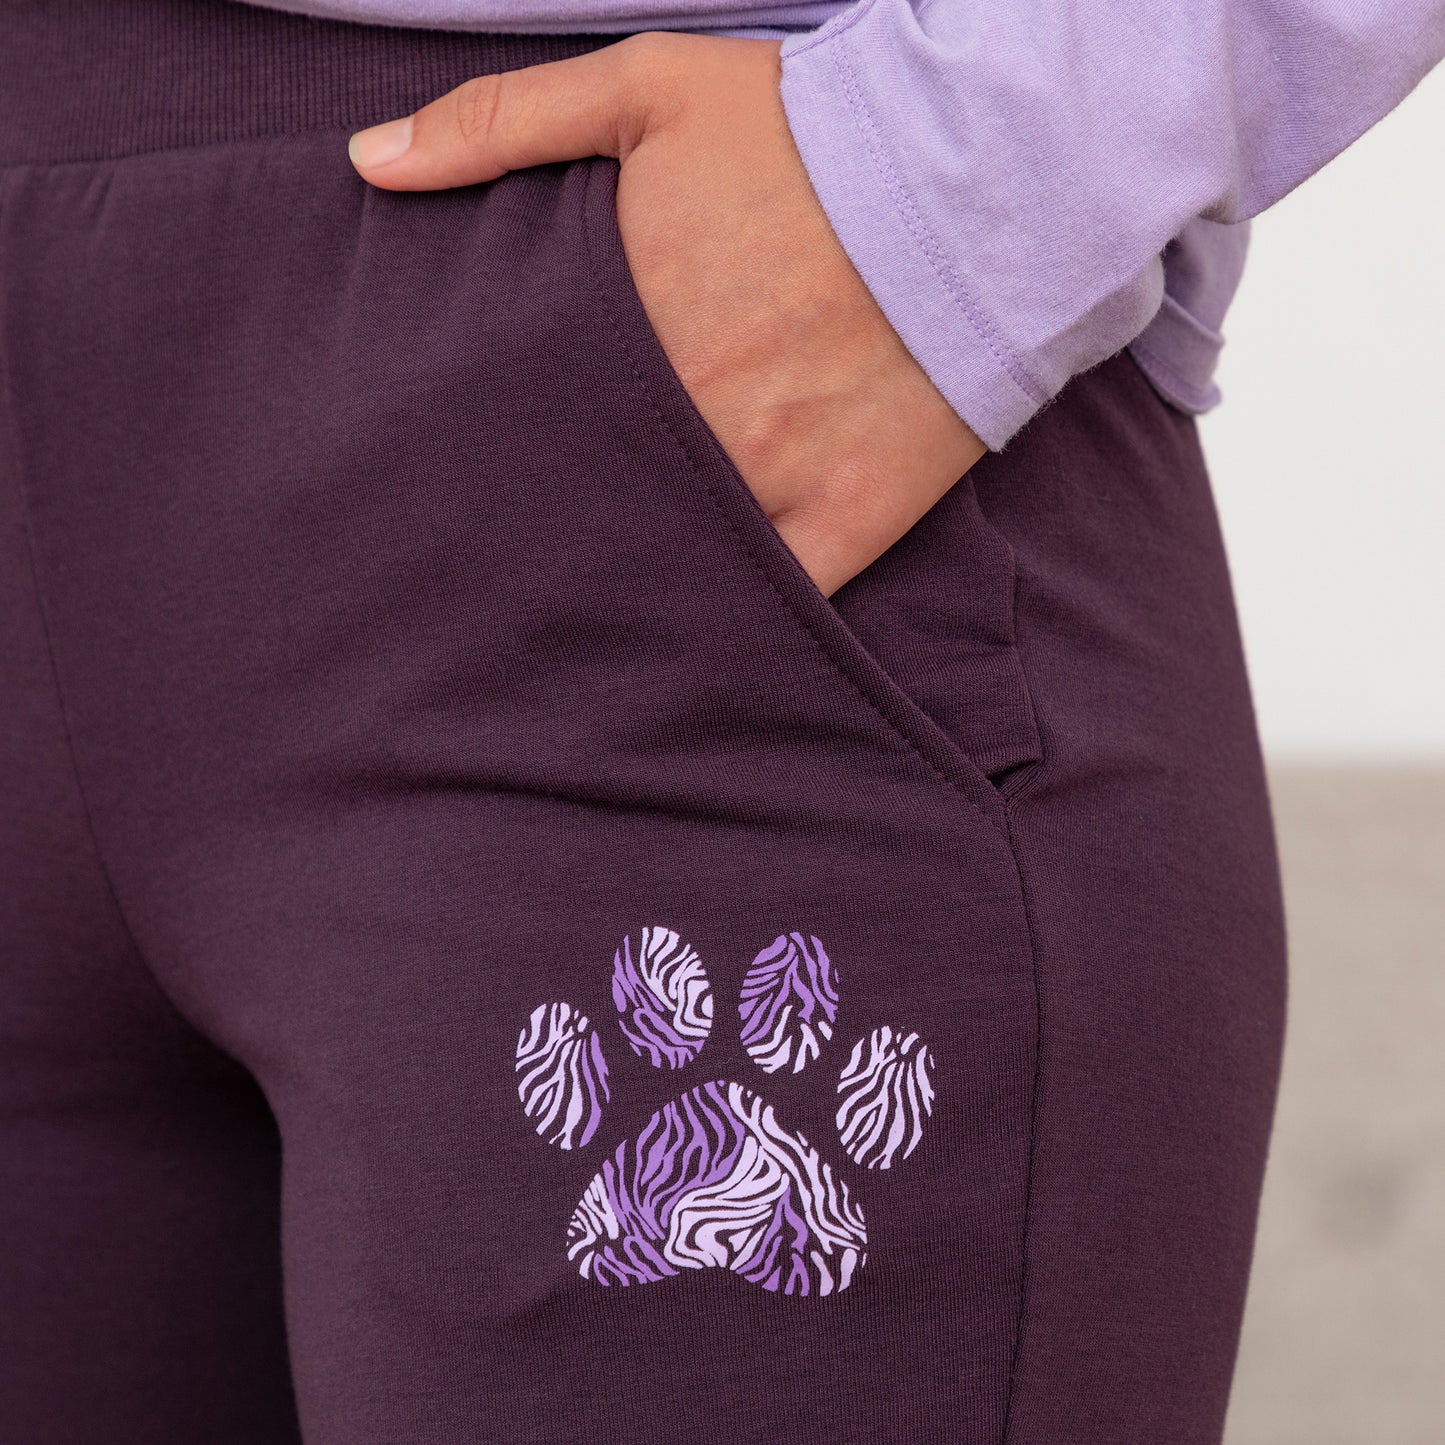 Paw Print Lightweight Tapered Sweatpants with Pockets & Elastic Waist